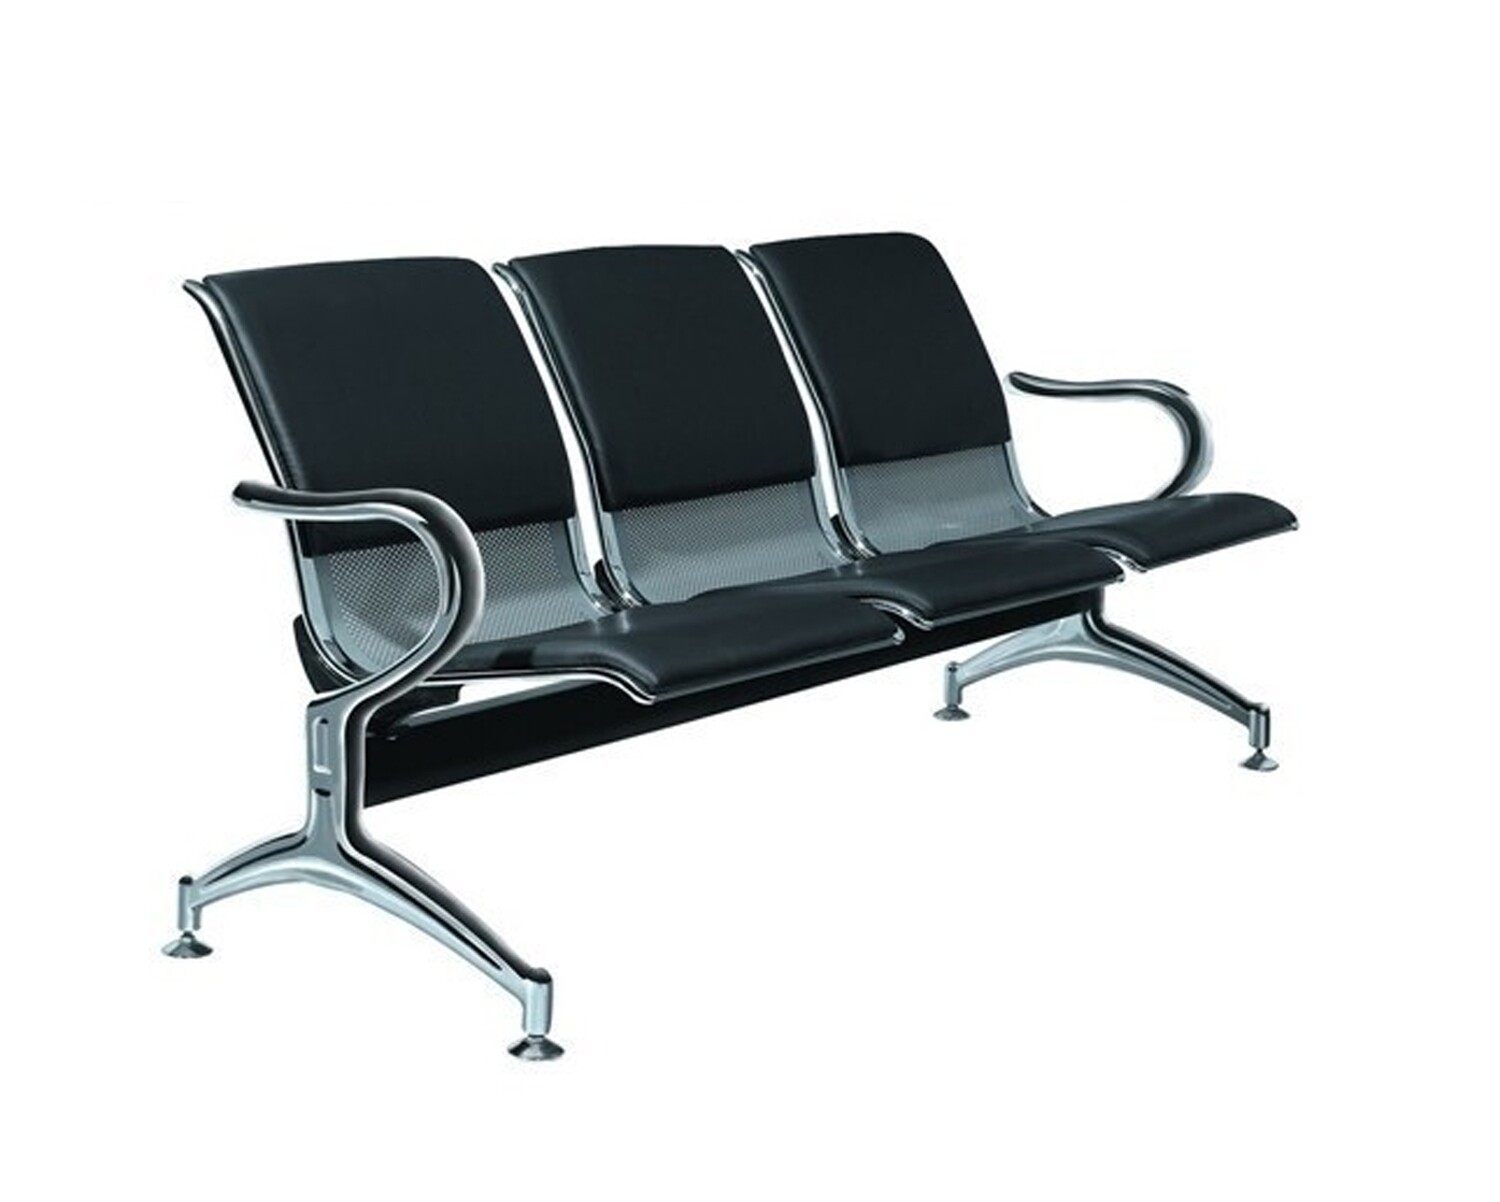 OFIX 3-Seater / 4-Seater / 5-Seater PU Airport Gang Chair (Black)